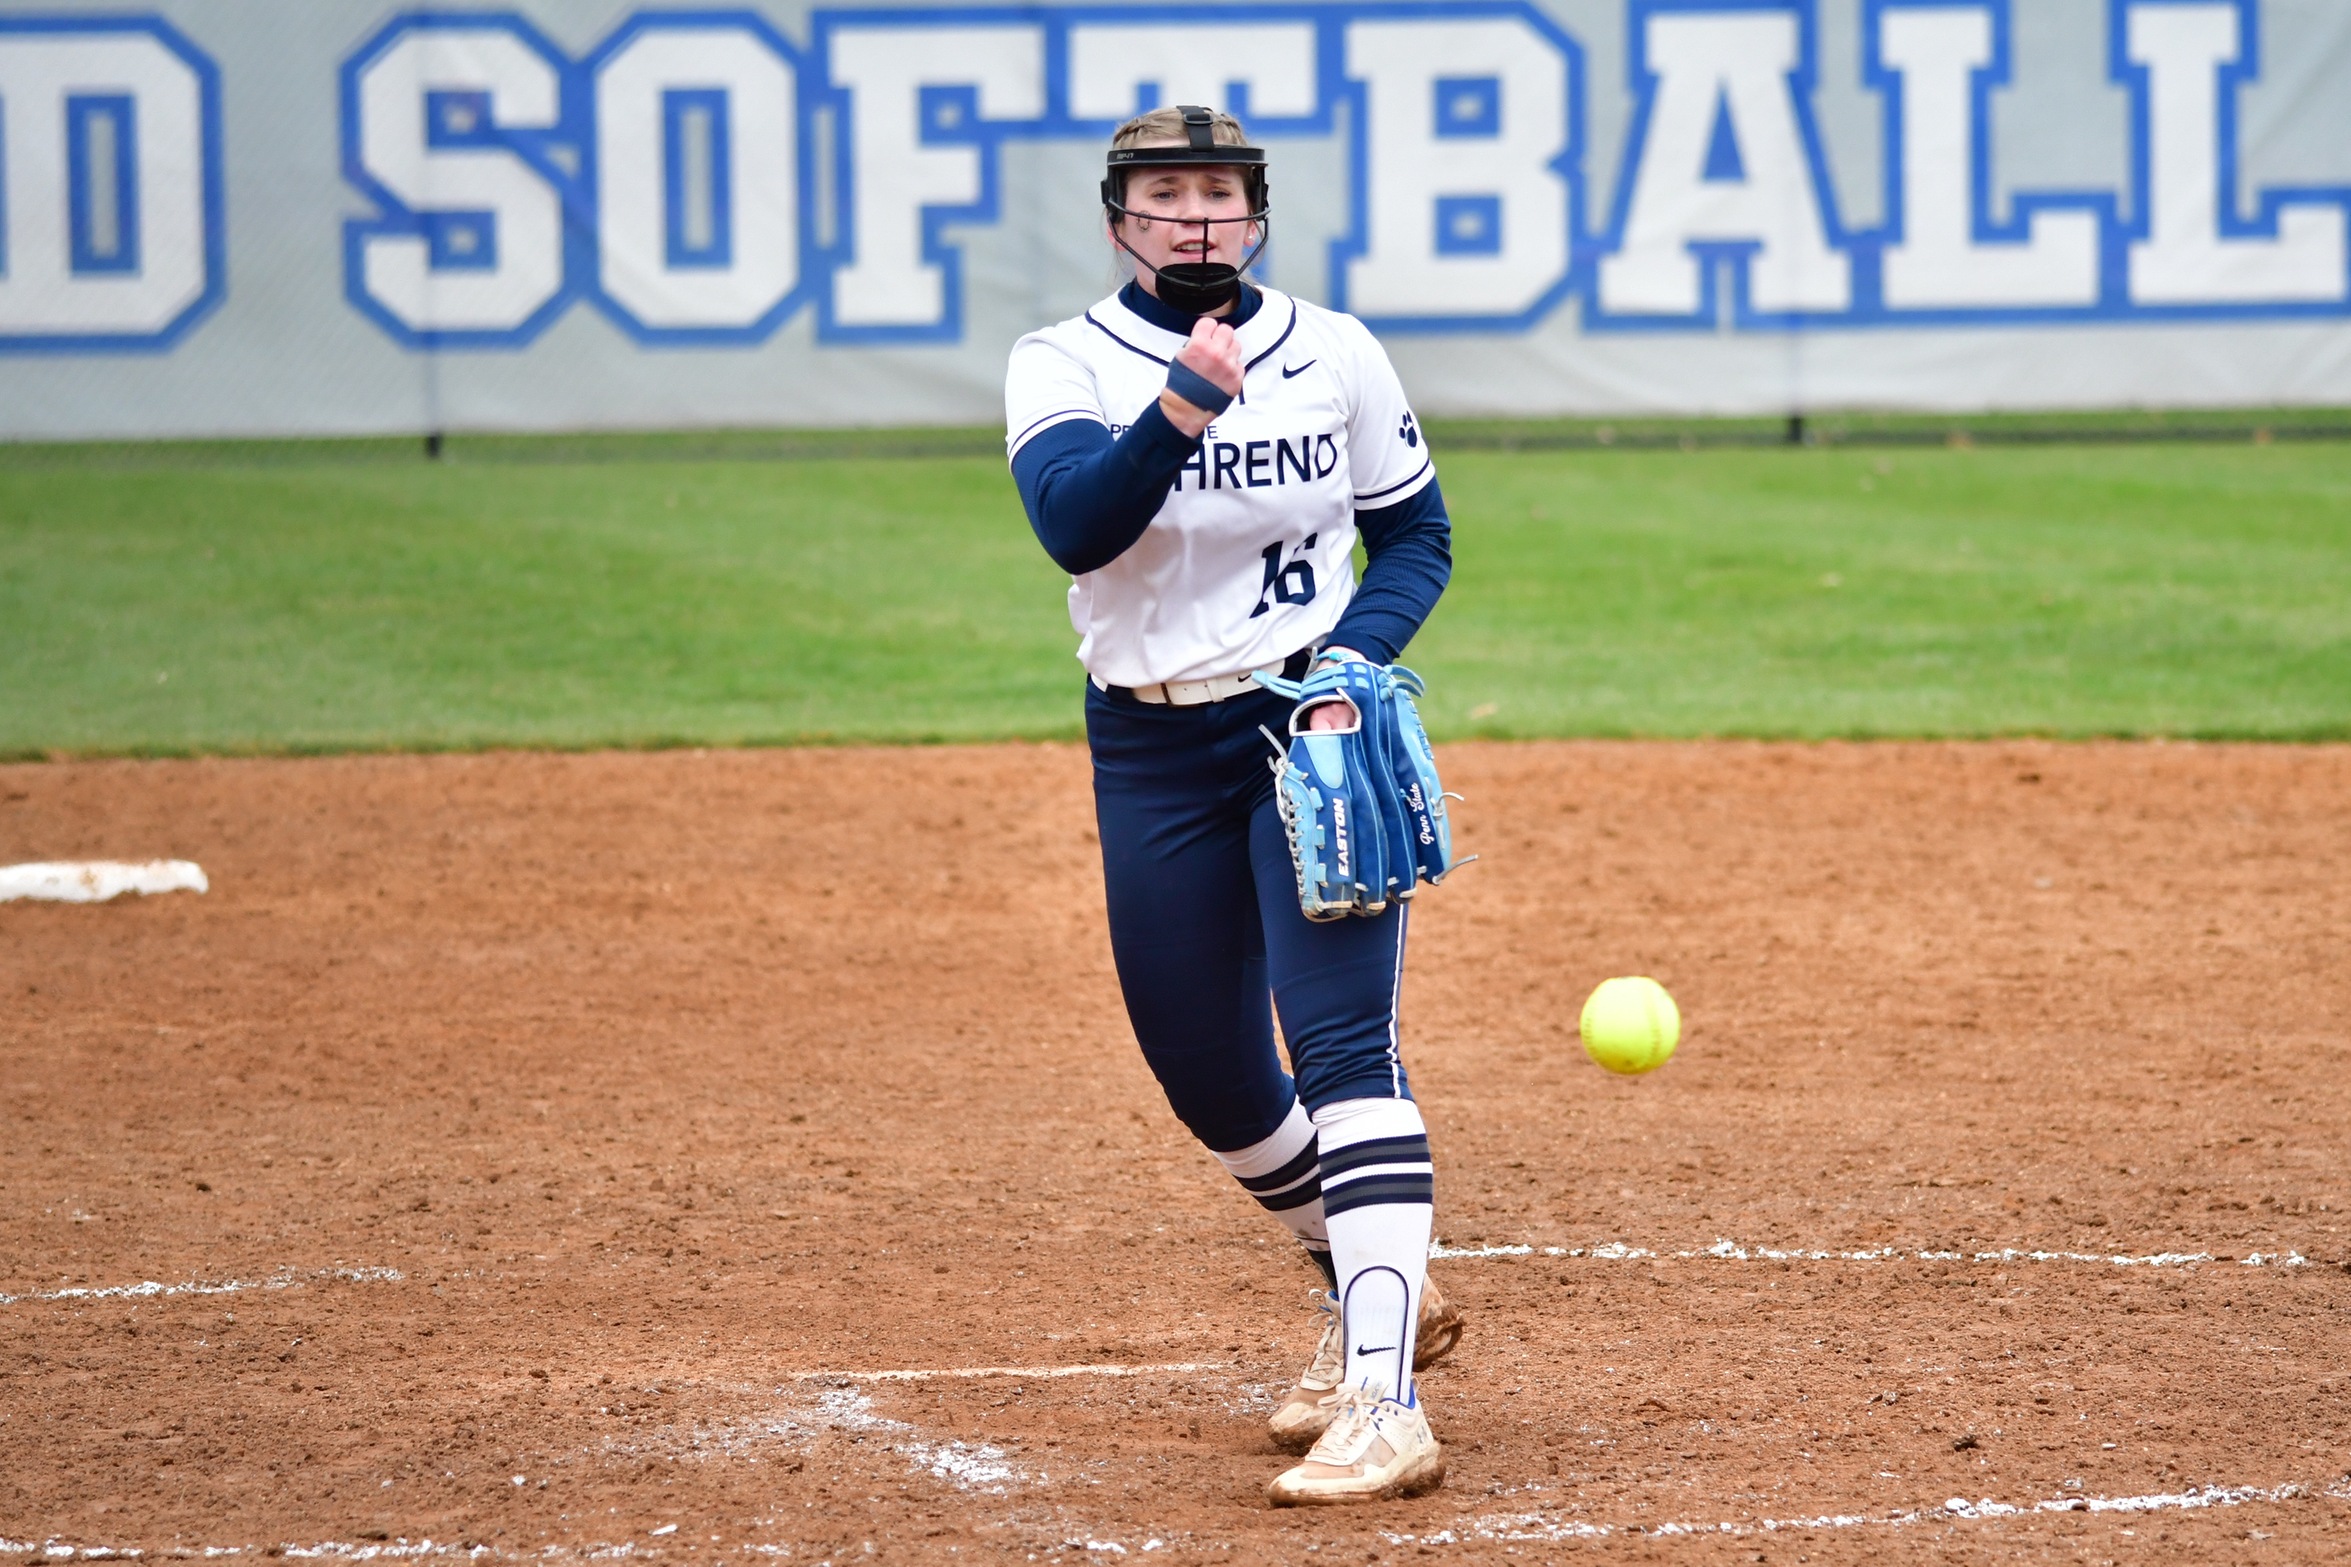 Behrend Softball Takes Two From Wells; Lindberg Fans 11 in Game Two